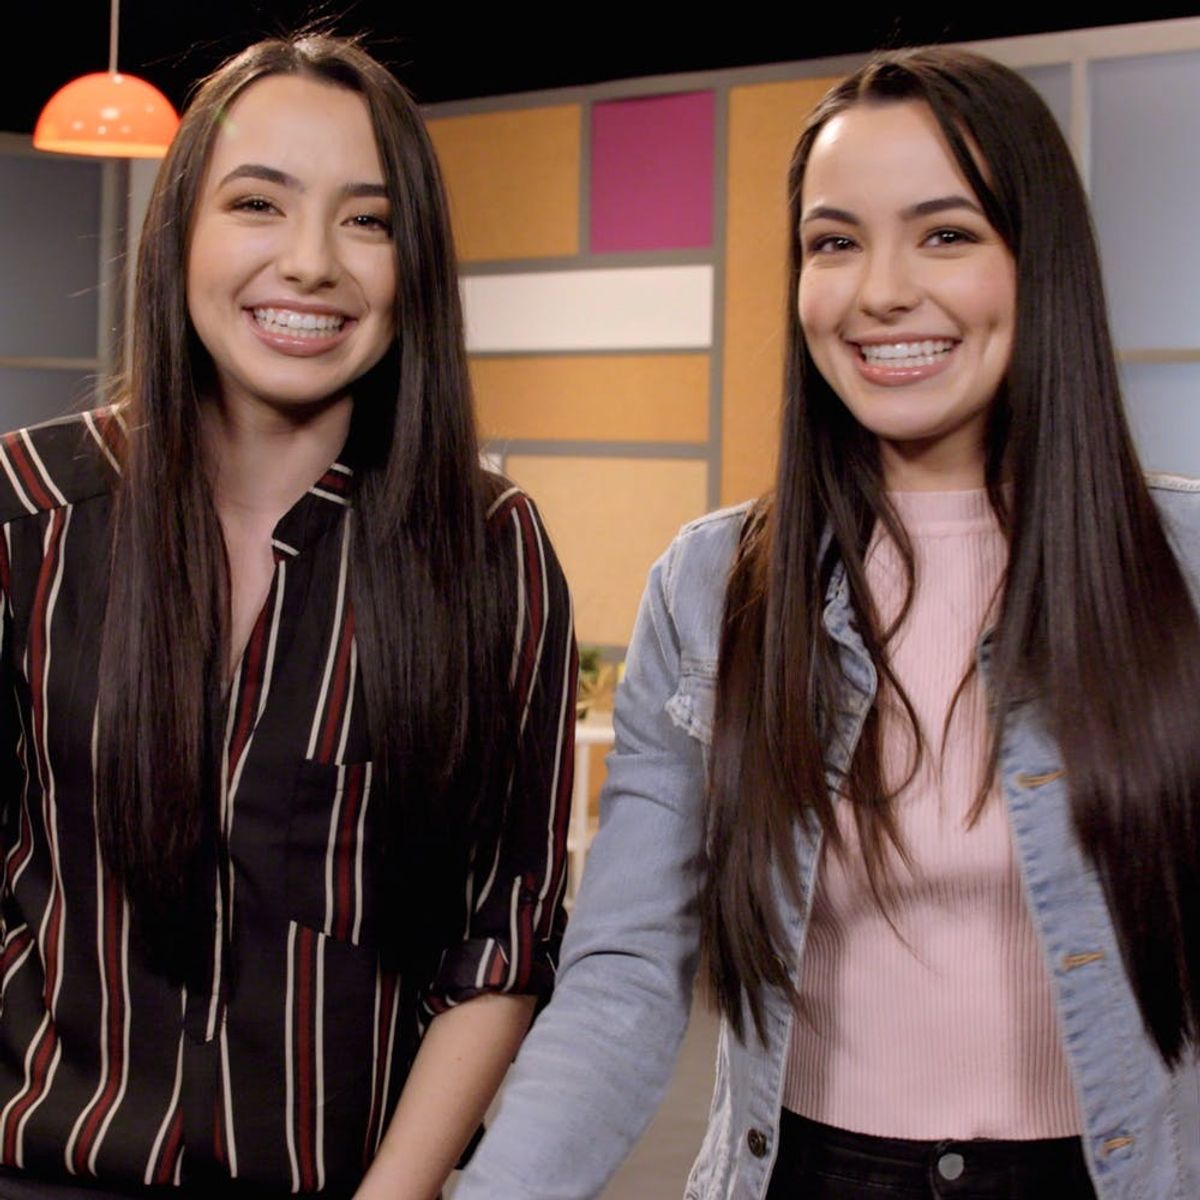 Will These 21-Year-Old Twin YouTube Stars Be the Tipping Point for Girls in STEM?